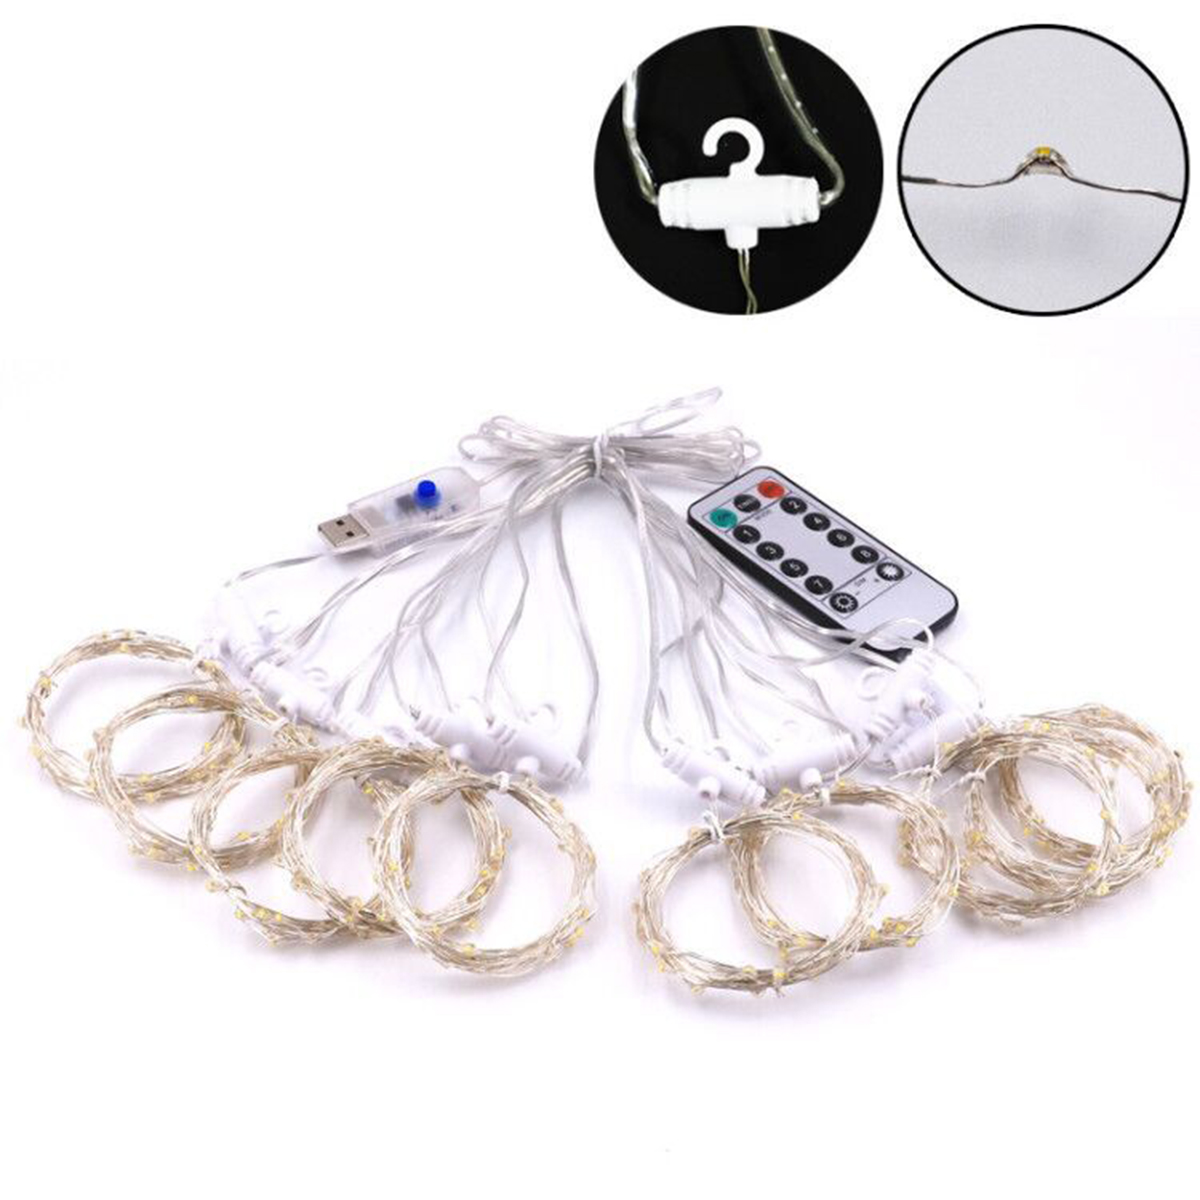 33m-300LED-USB-Waterproof-LED-Window-Curtain-String-Lights-Remote-Control-8-Modes-Fairy-Lights-Home--1745075-11